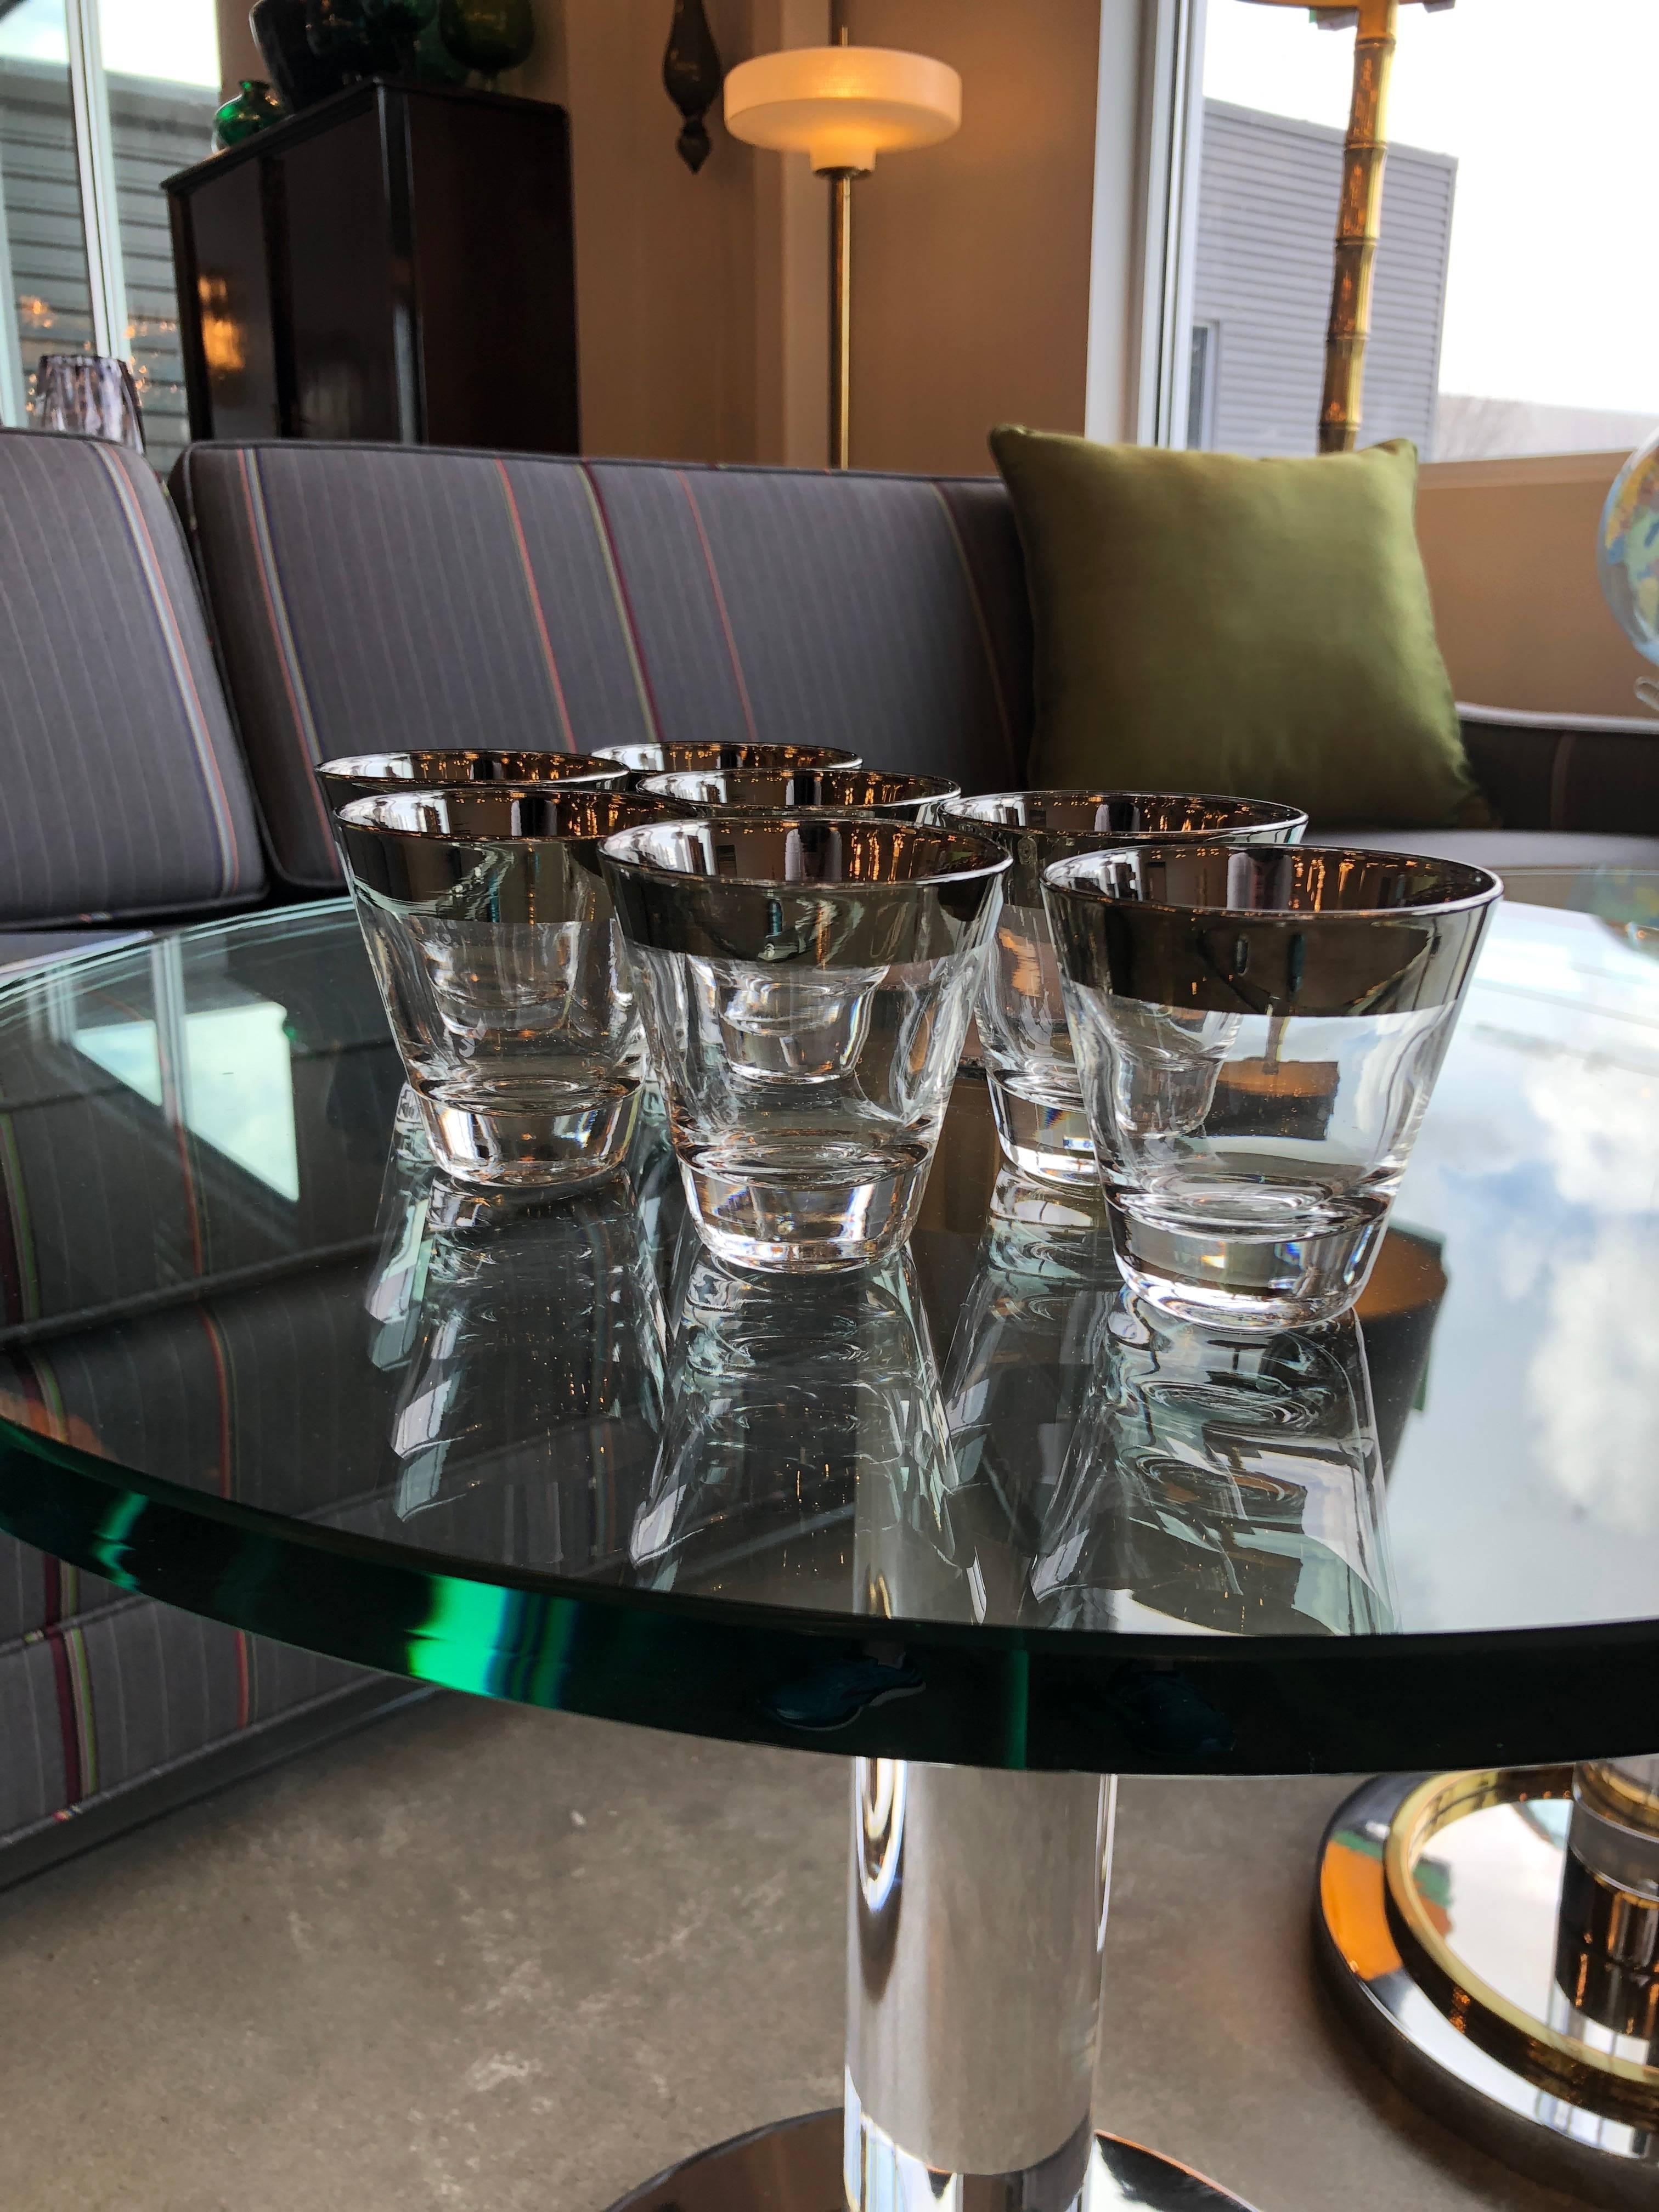 Offered is a set of seven Mid-Century Modern Dorothy Thorpe silver overlay / silver rimmed shot cocktail glasses. Perfect for all of the new 